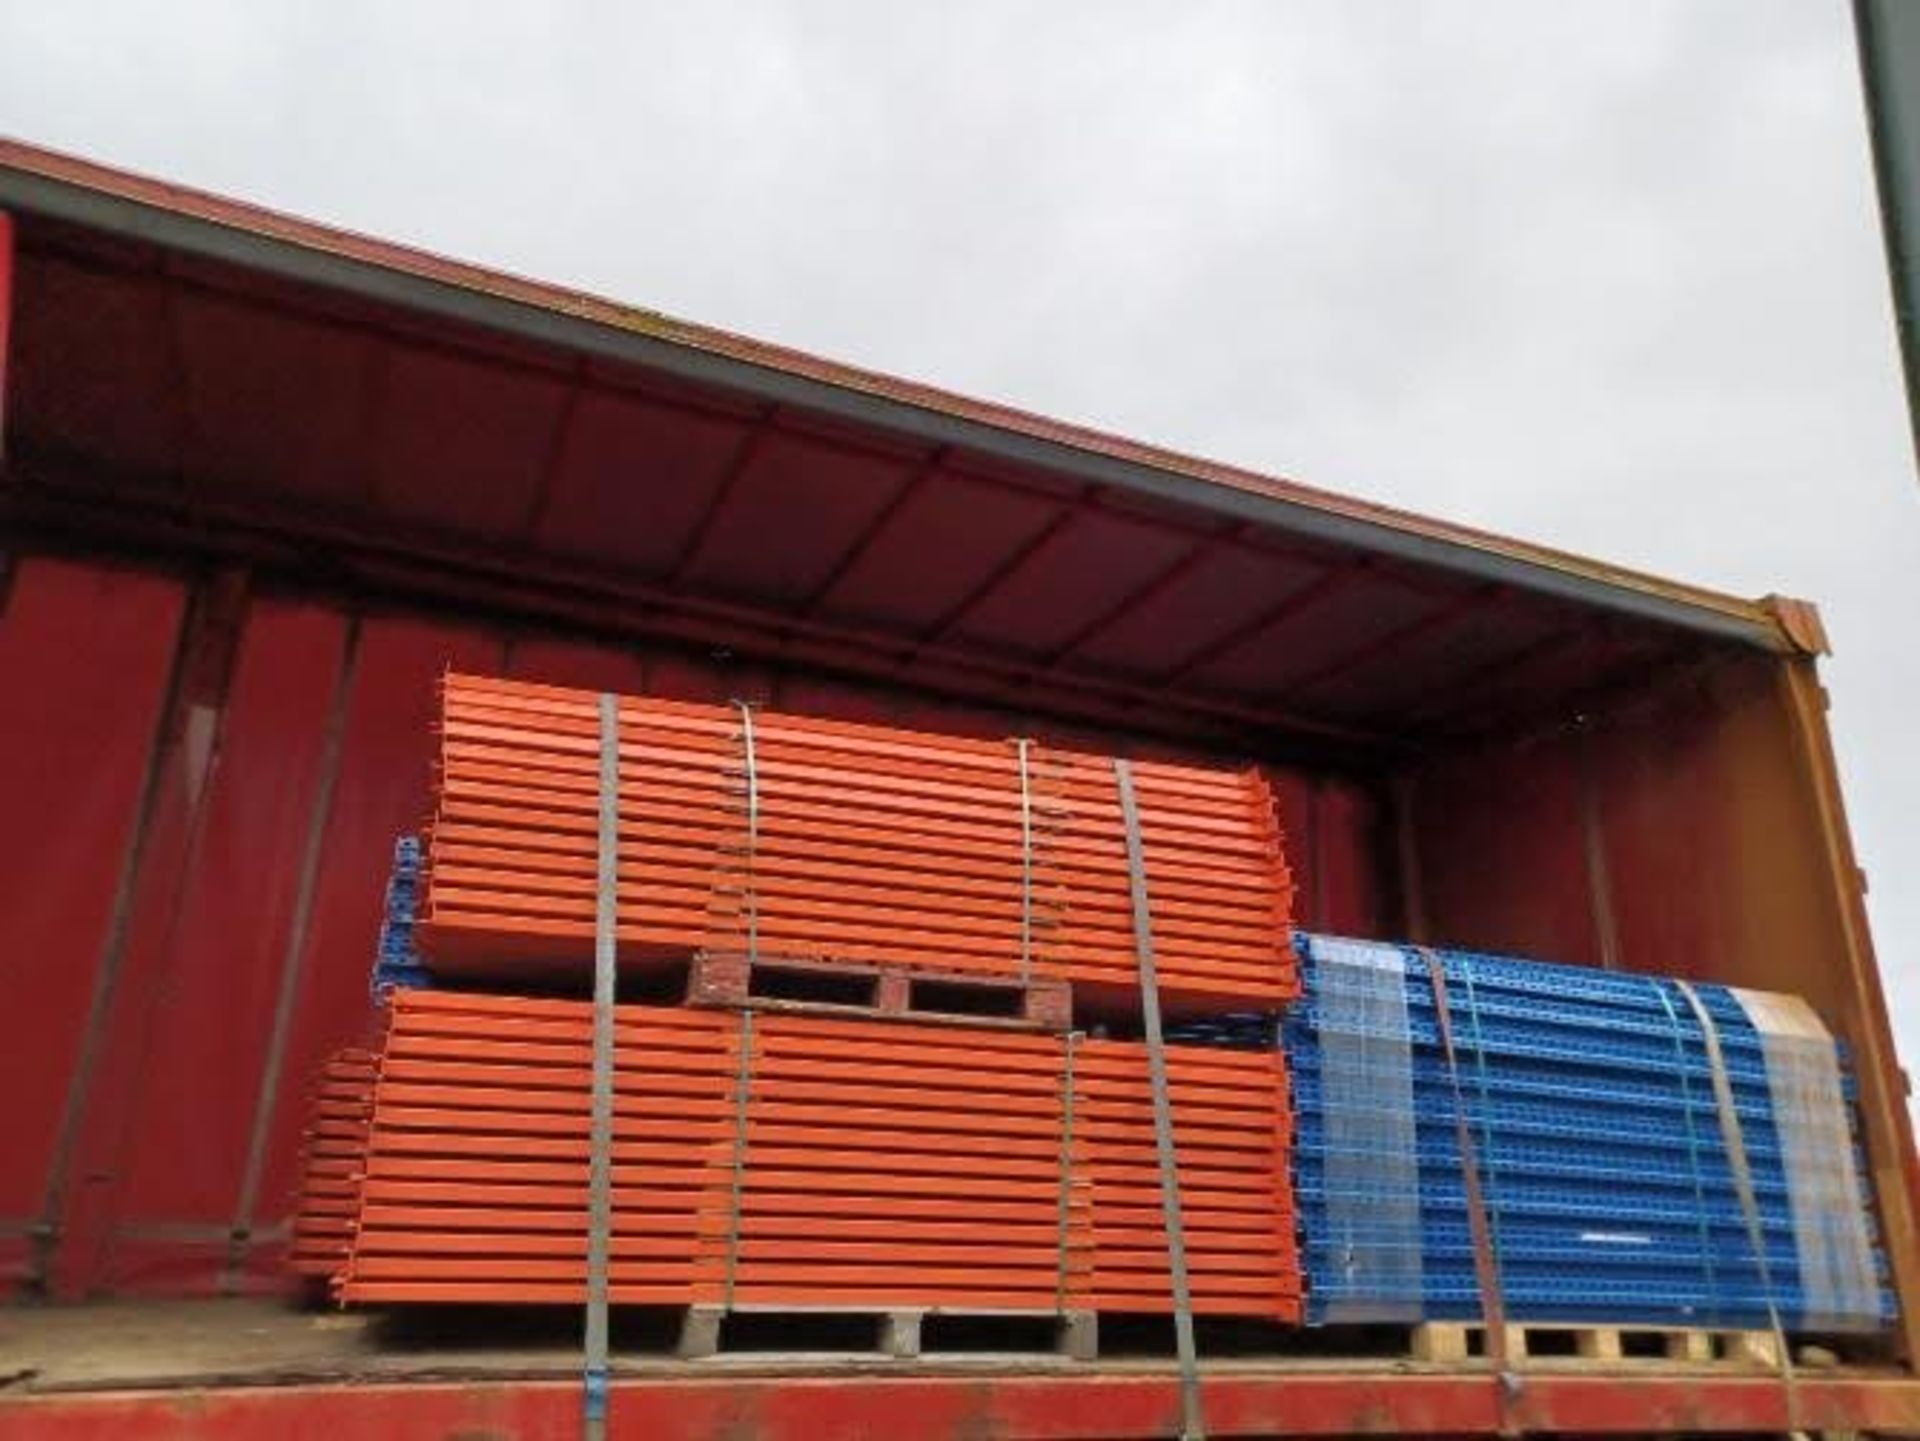 AS NEW PALLET RACKING - 8FT HIGH, 12FT LONG, 41Ó WIDE - APROXIMATELY 50 BAYS *PLUS VAT*